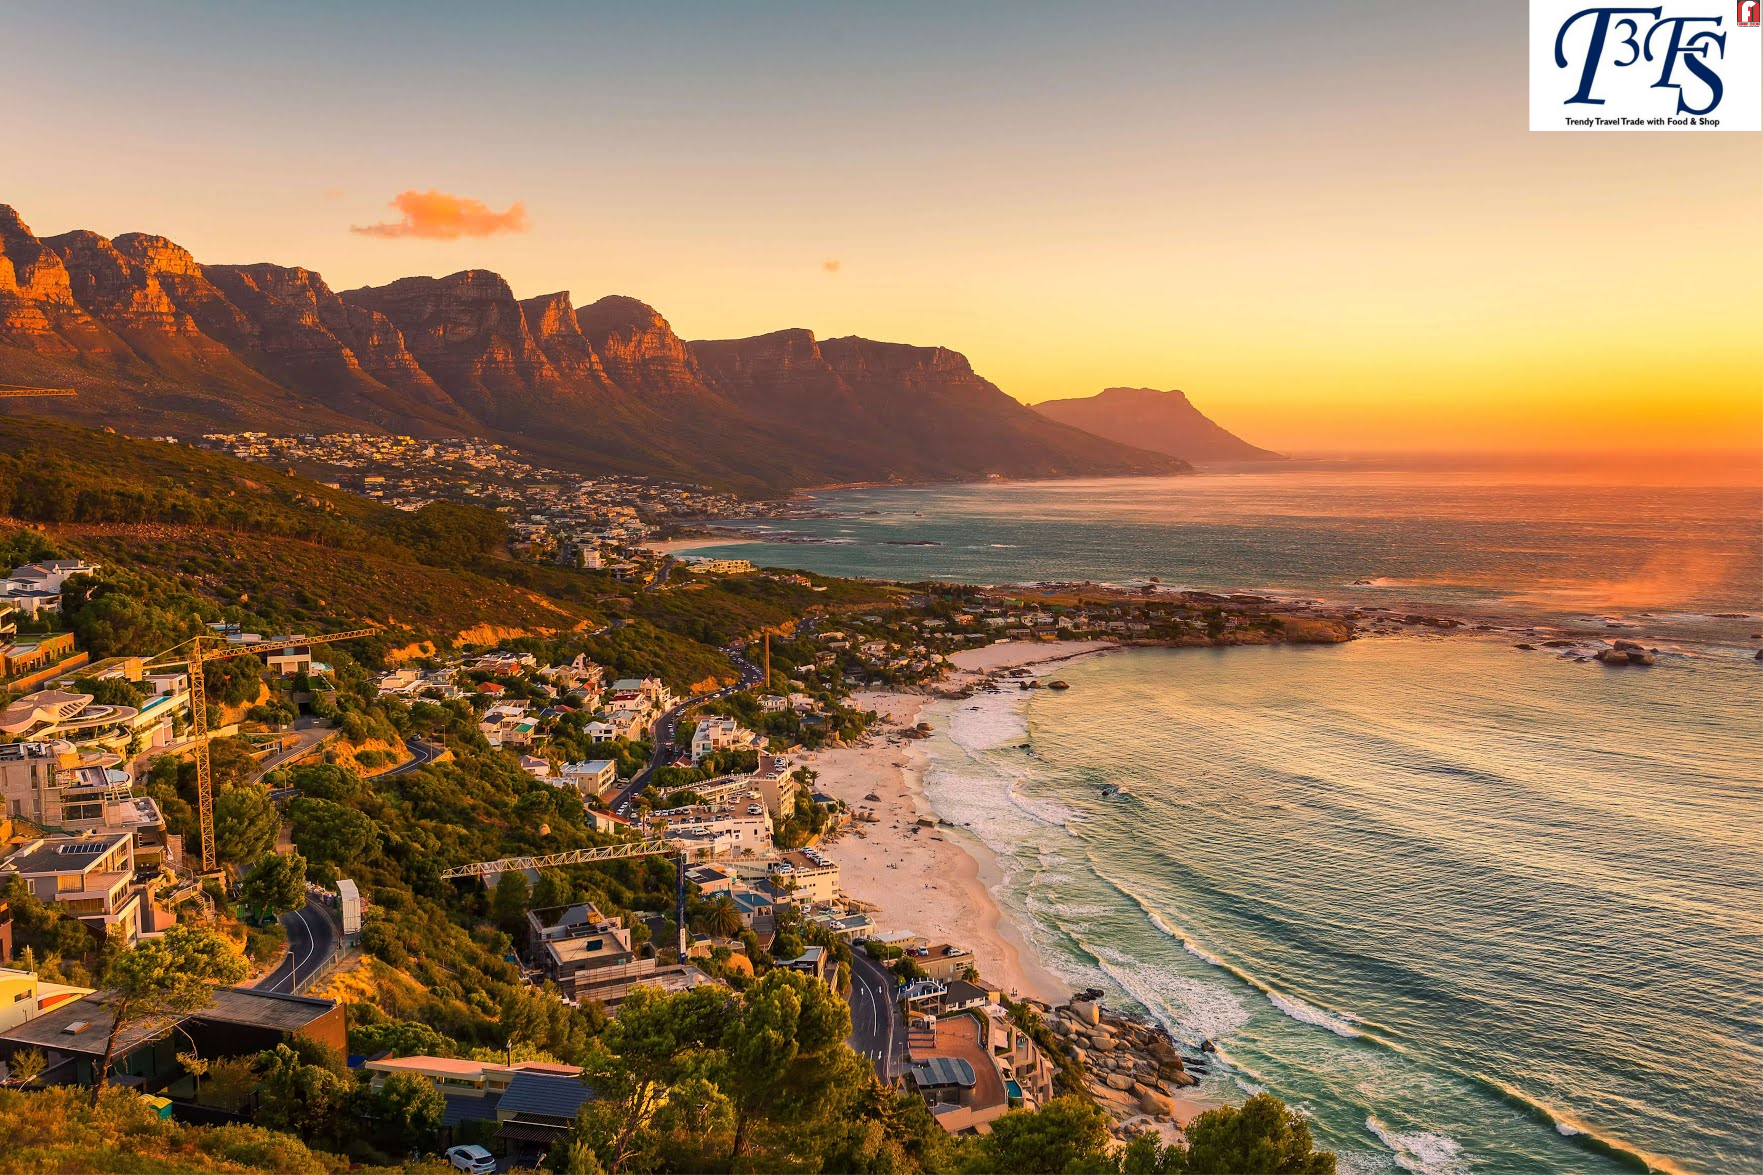 South African Tourism receives 64% forward bookings from Mumbai for January-June 2023